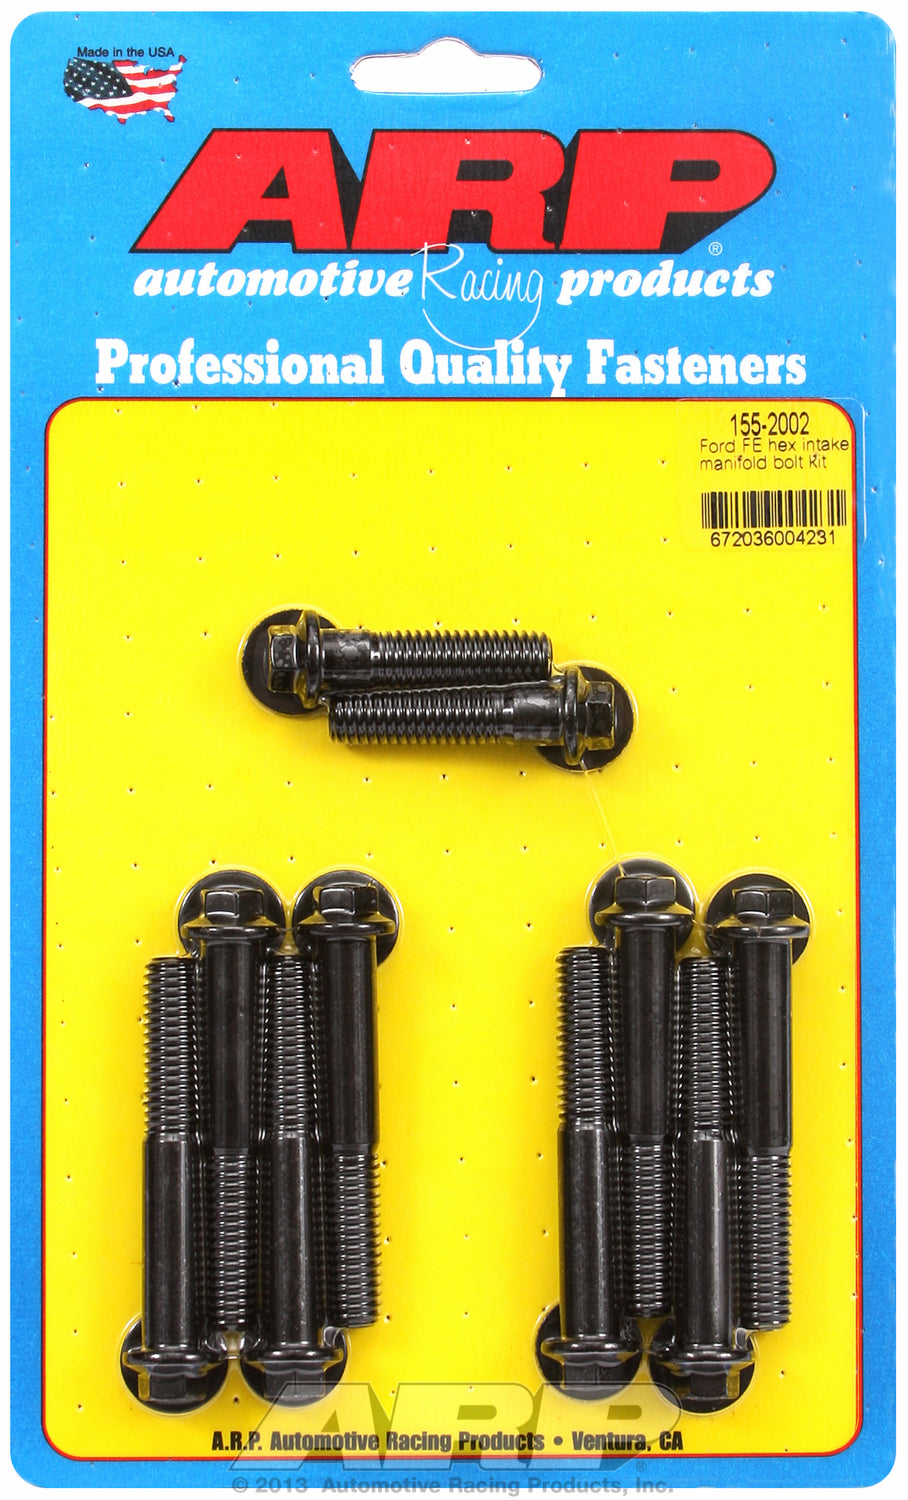 Hex Head Black Oxide Intake Manifold Bolts for Ford 390-428 cid FE Series